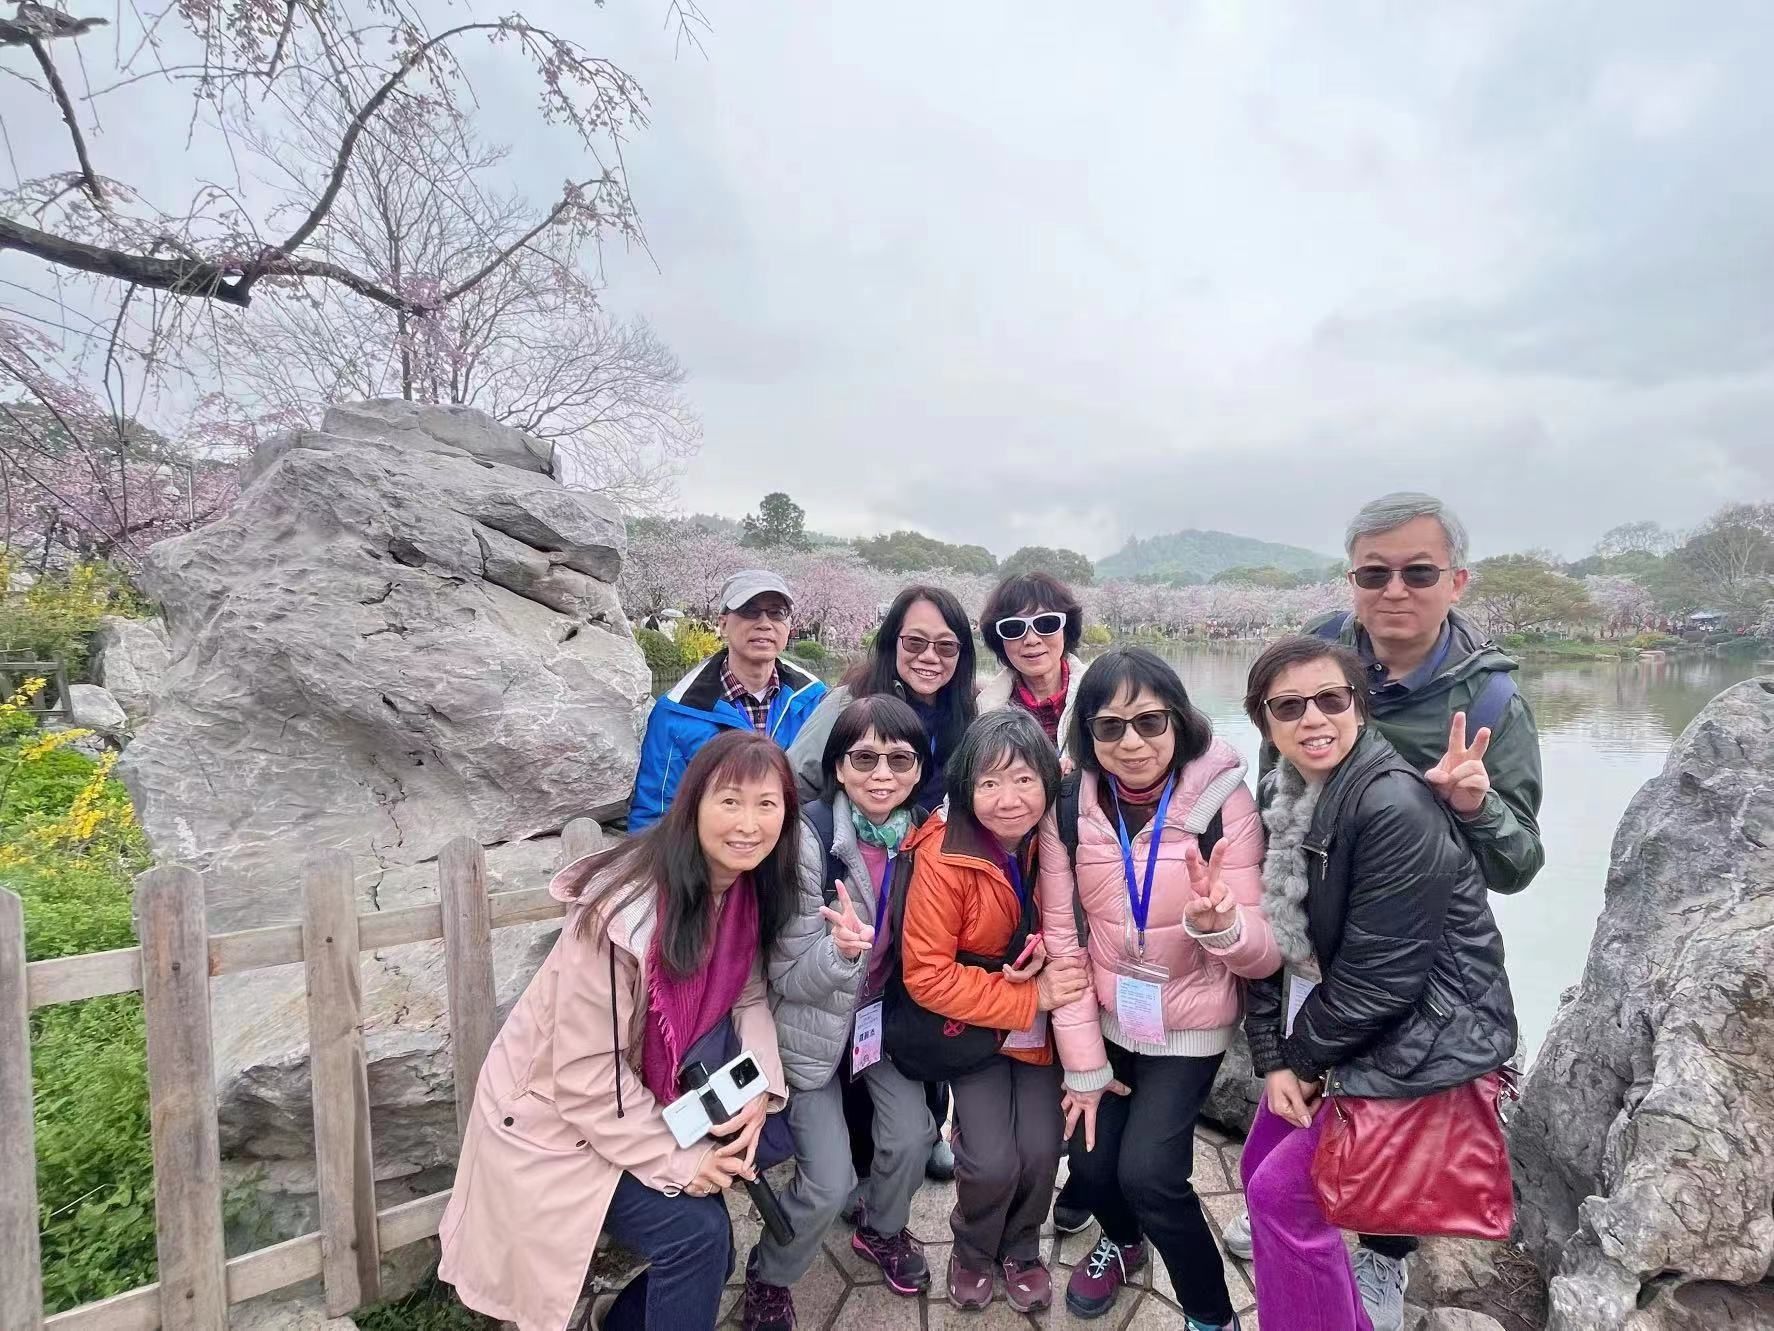 Tour groups from Hong Kong and Macao visit Wuhan | 港澳旅游团接踵而至